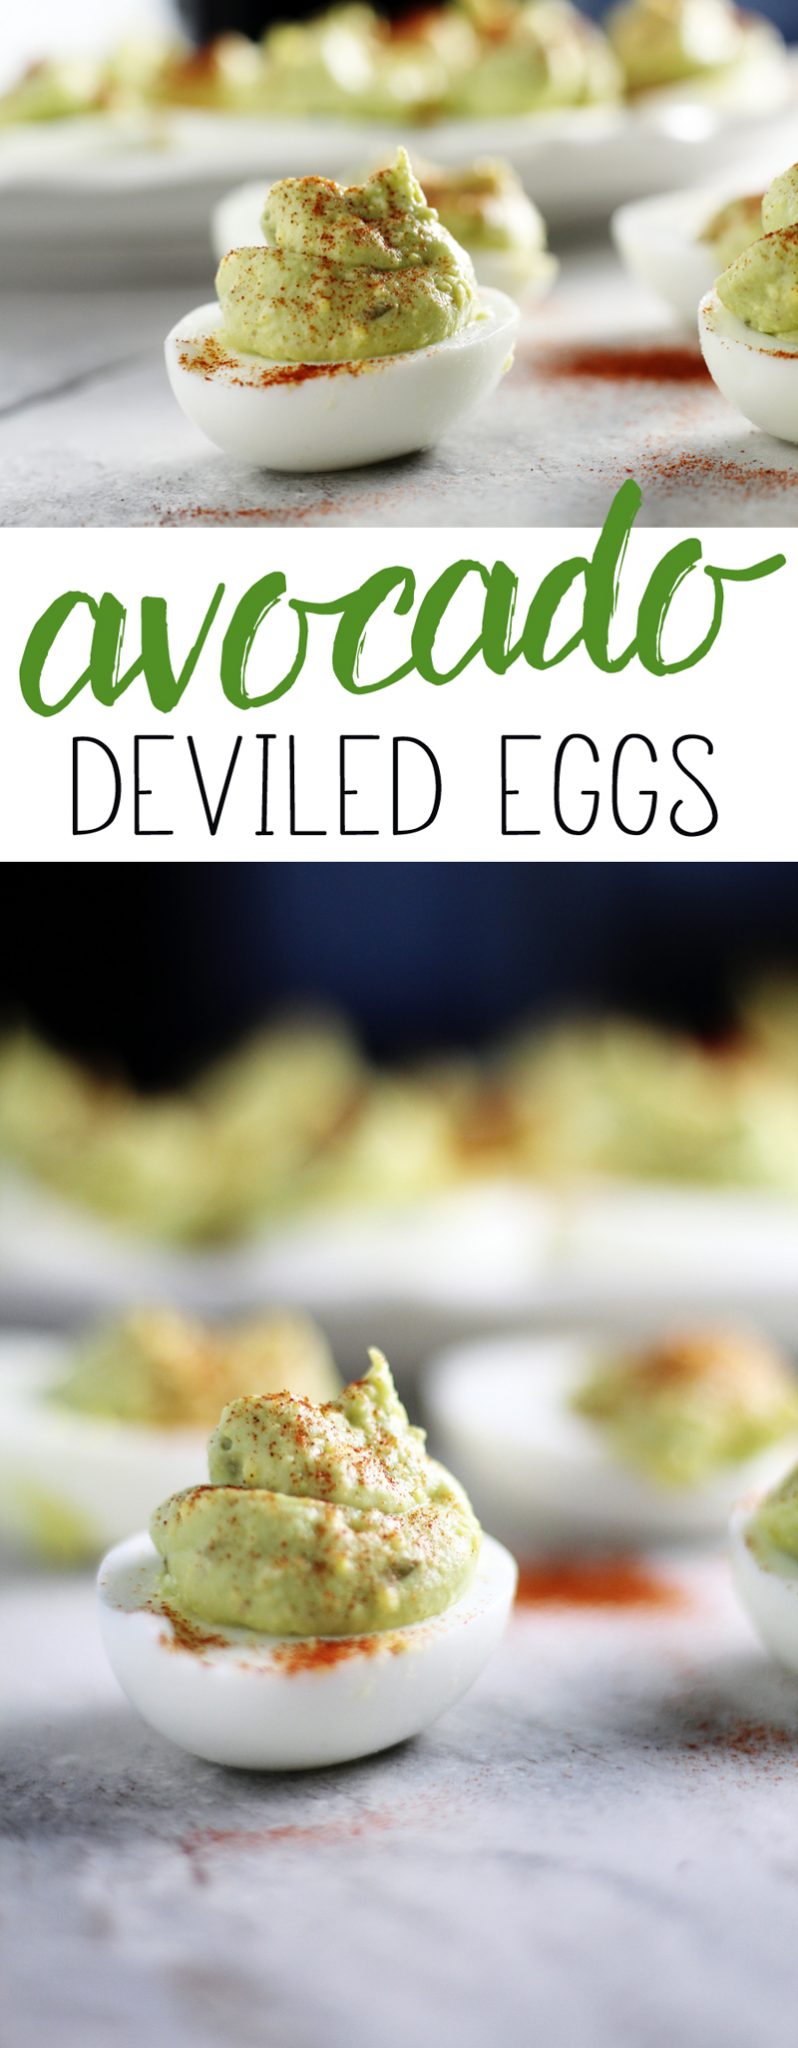 Southern Style Avocado Deviled Eggs | Buy This Cook That